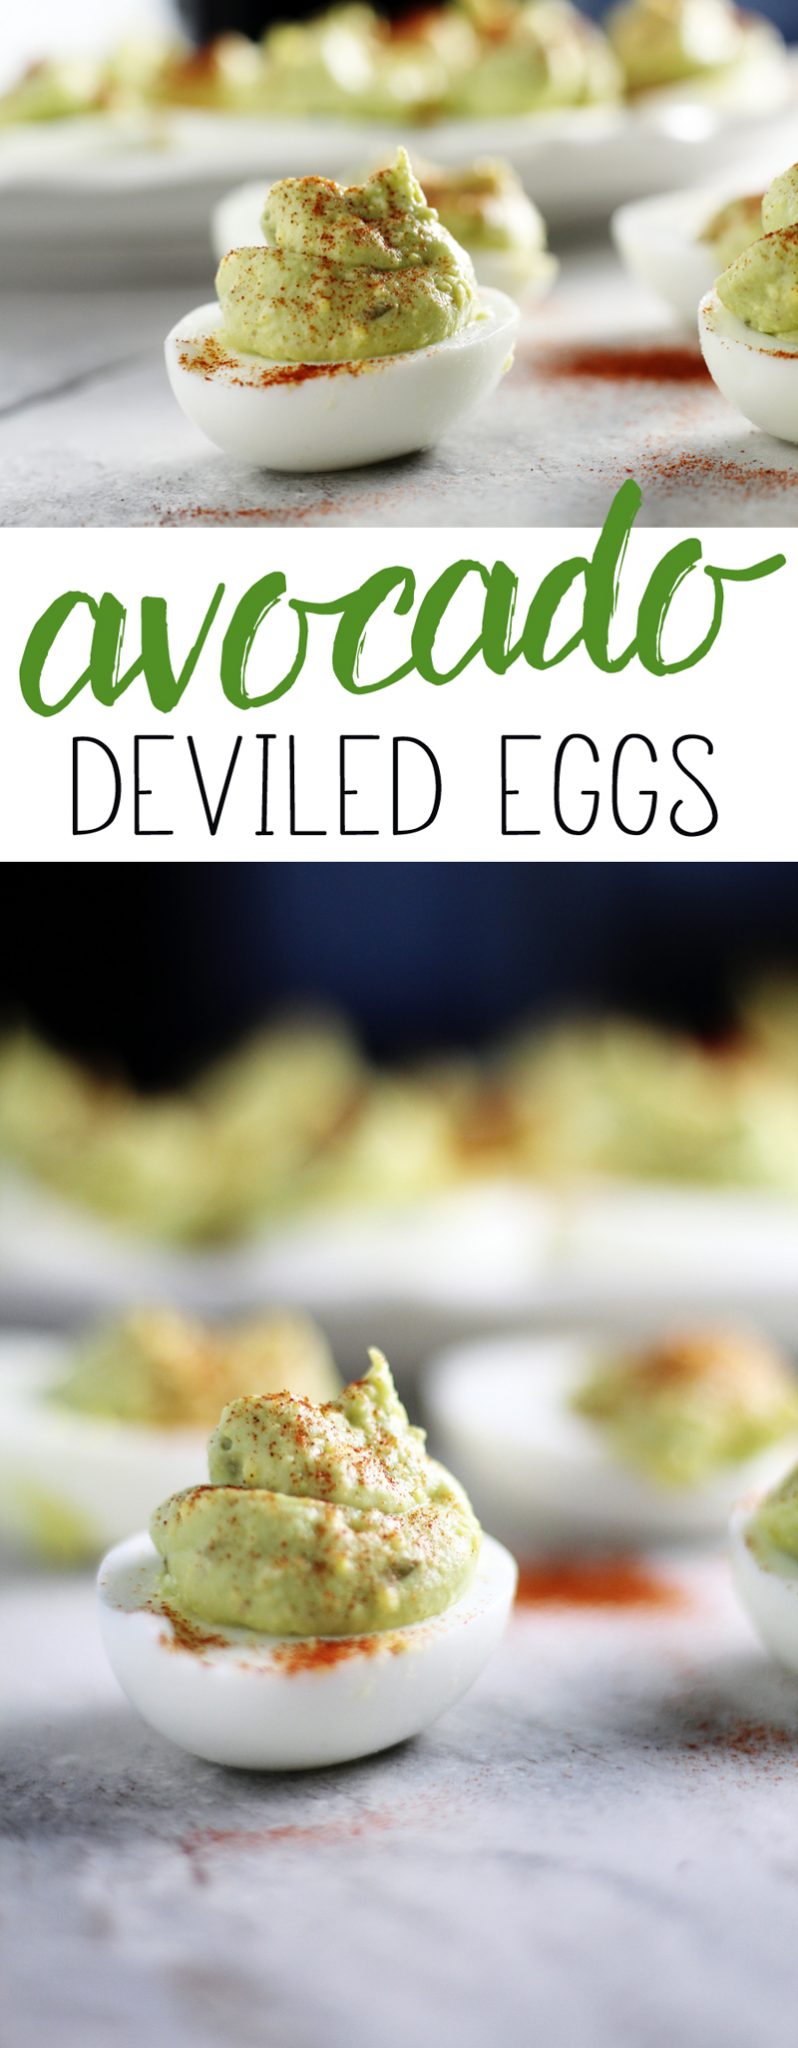 Southern Style Avocado Deviled Eggs | Buy This Cook That